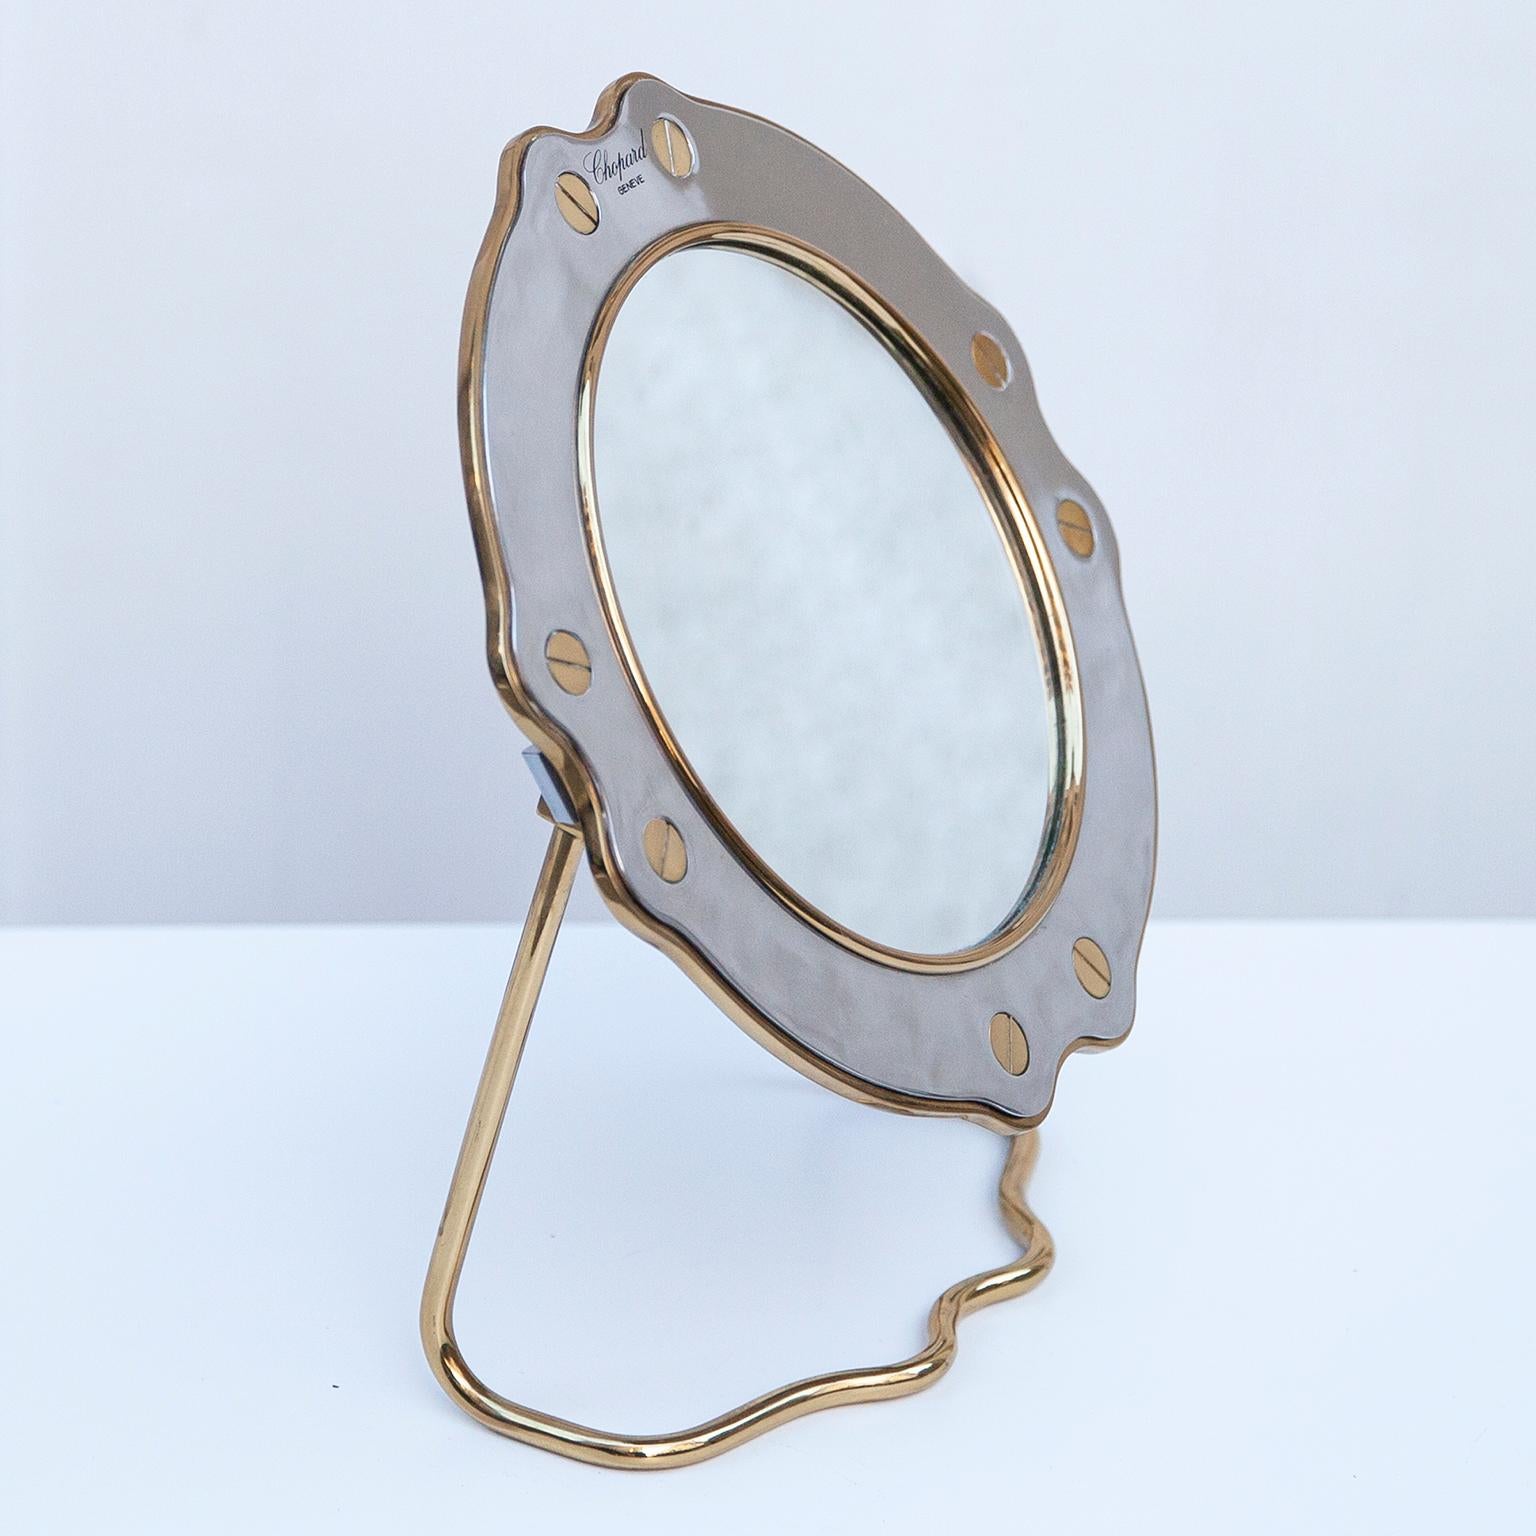 Very rare vintage vanity table mirror made in chrome and brass in the typical Chopard St.Moritz design.

Measures: 30 H x 26 B x 10 D cm.